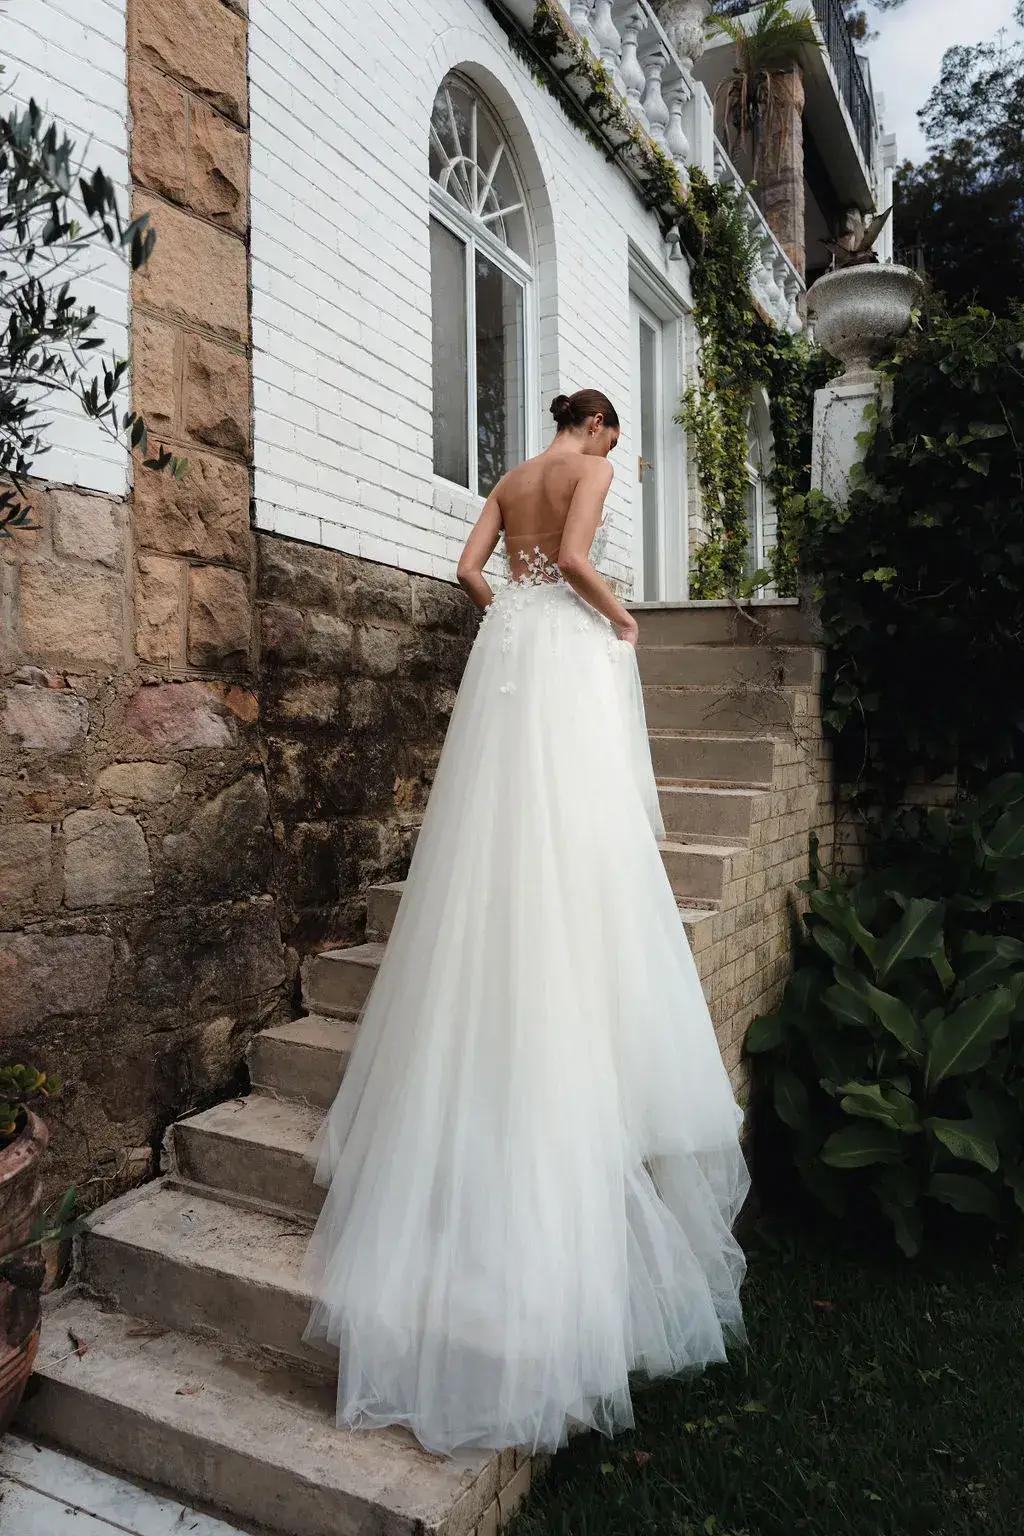 Summer Bridal Fashion: The Ultimate Guide to Staying Stylish and Cool Image